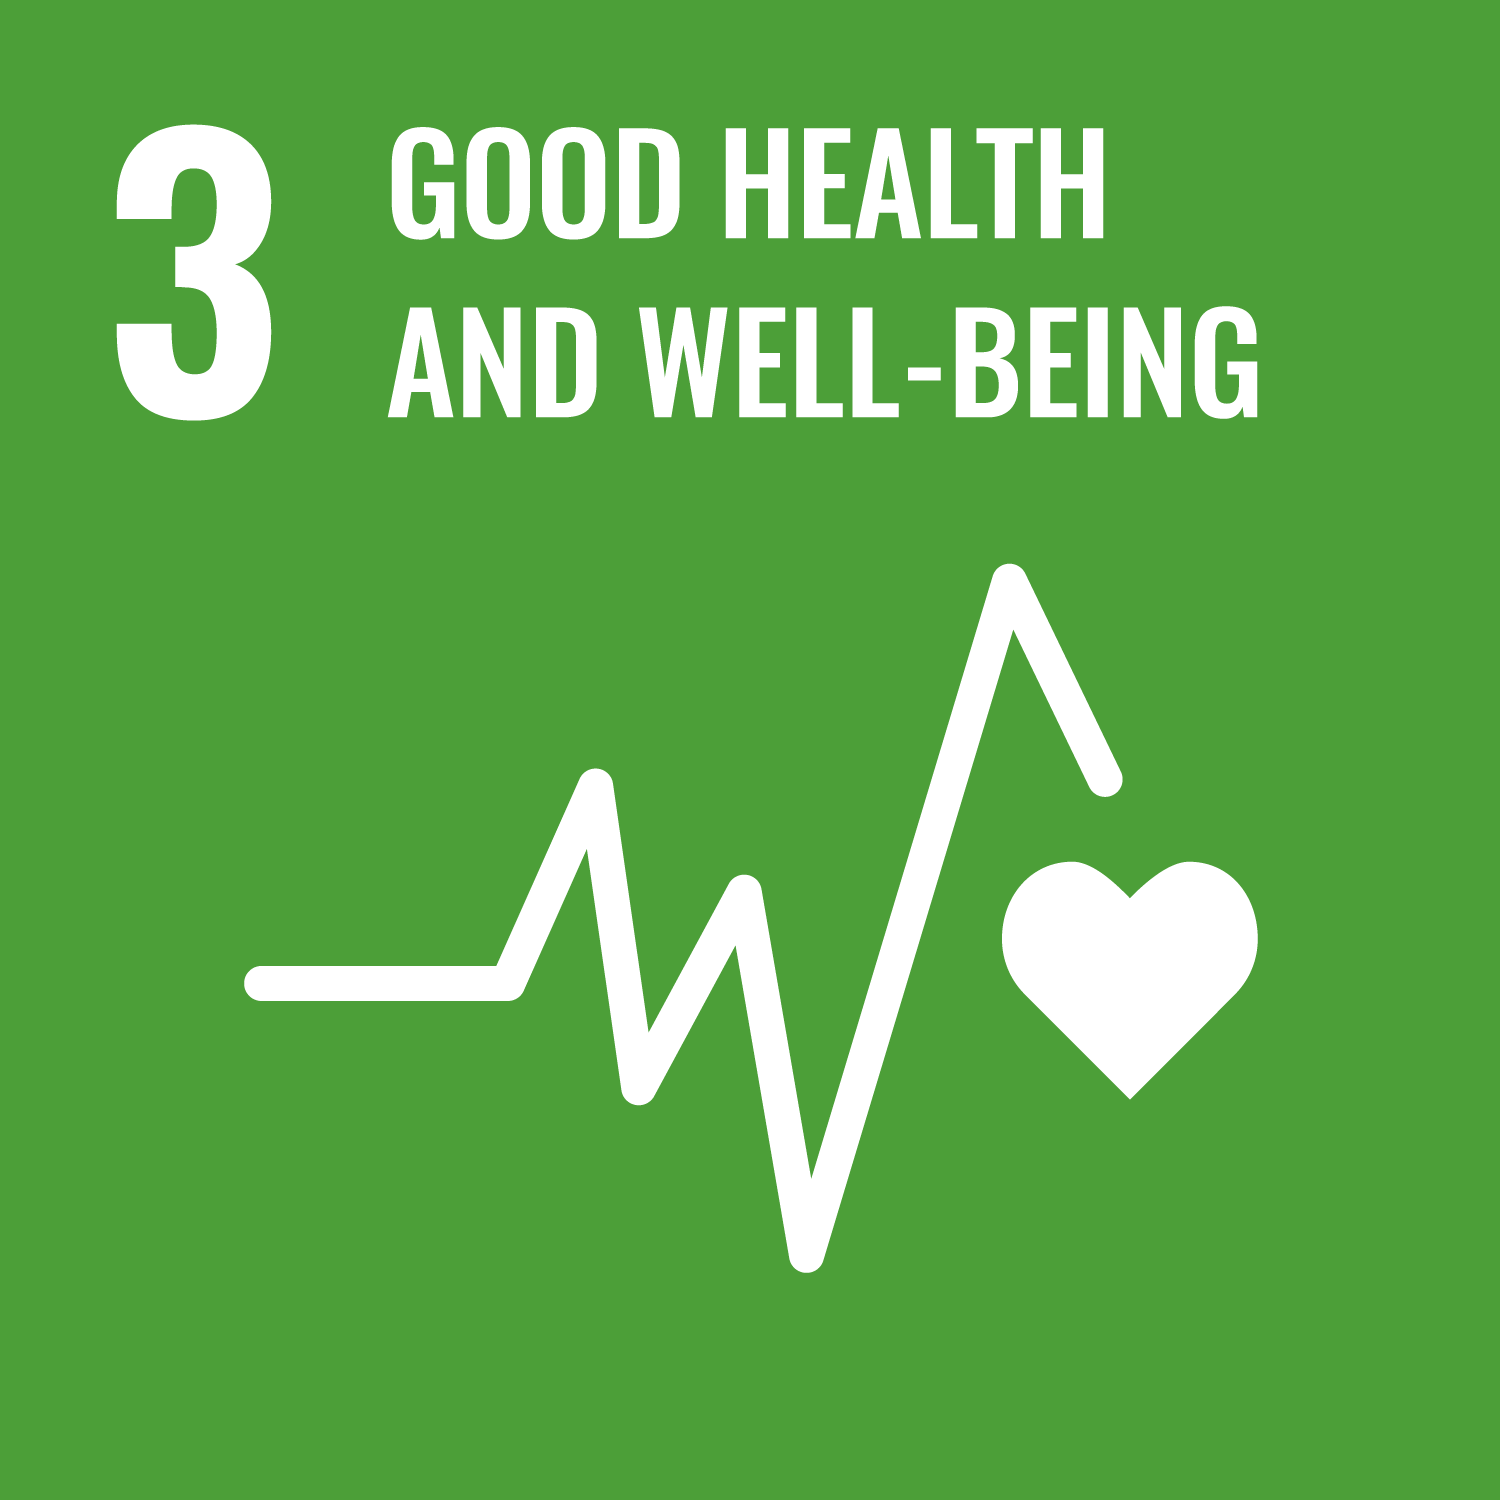 United Nations Sustainable Development Goal Number 3 Good Health and Well-being